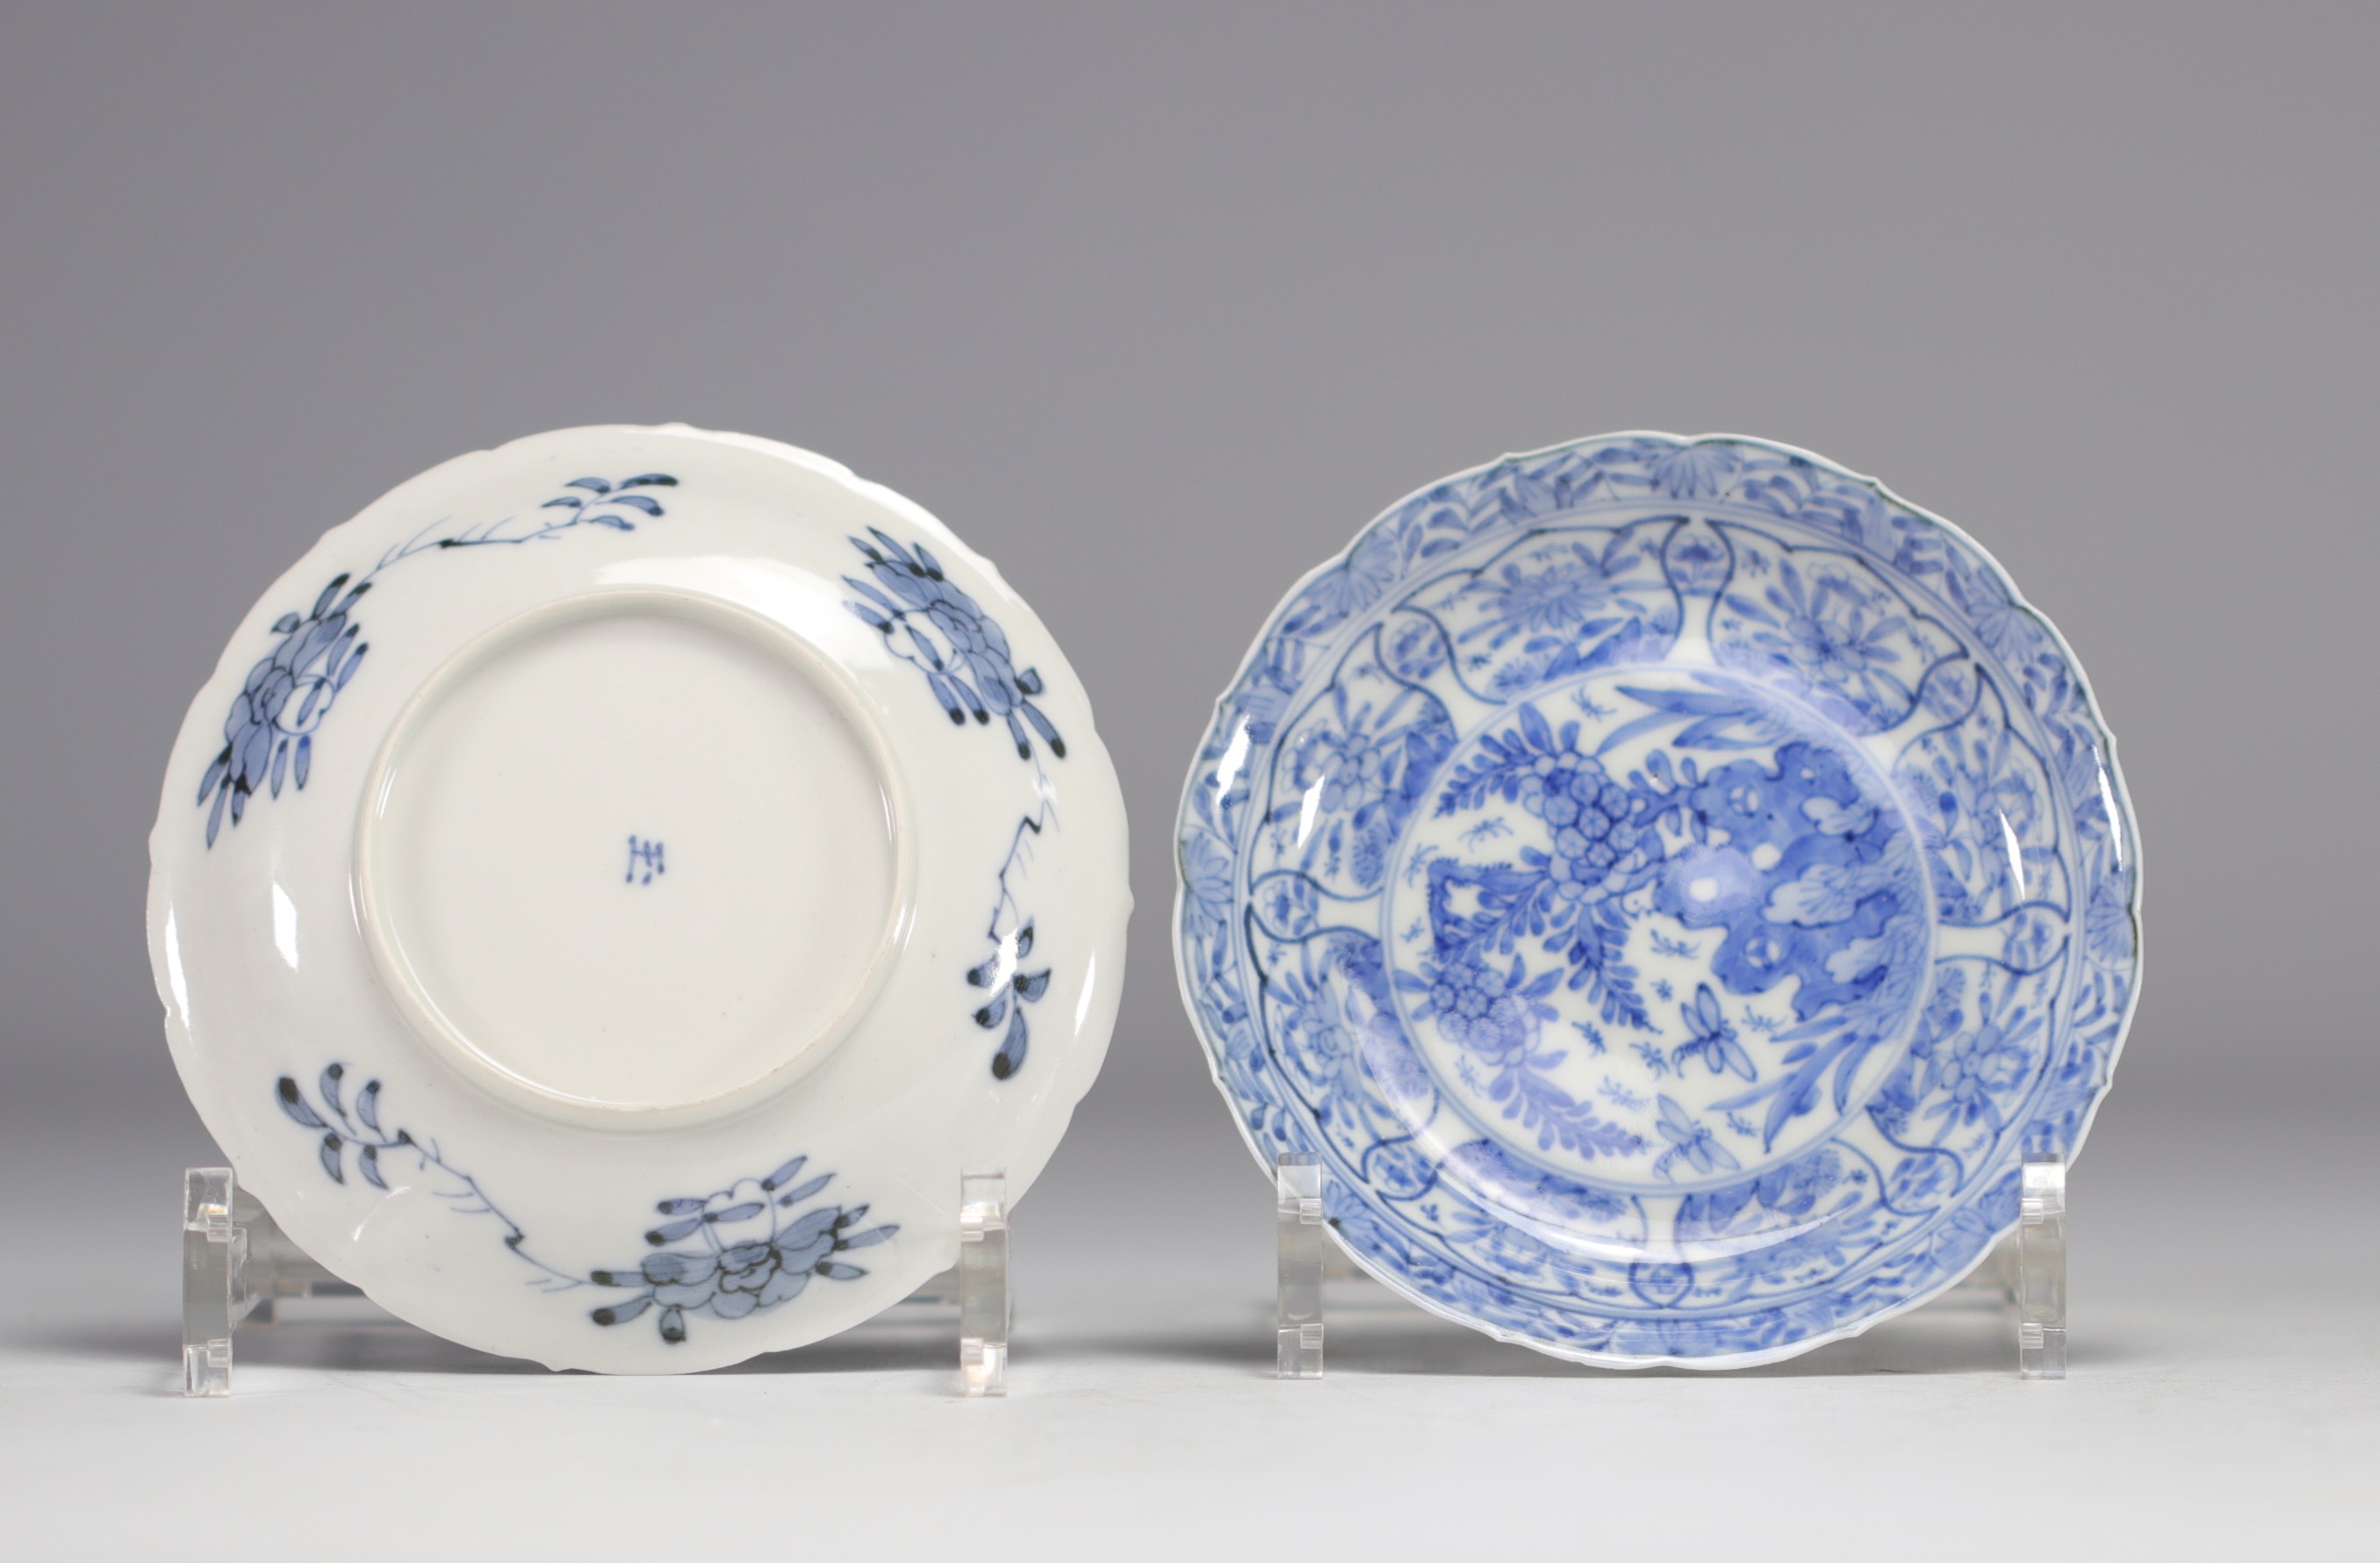 Set of white and blue bowls and saucers with various flower decorations from 18th century - Image 3 of 6